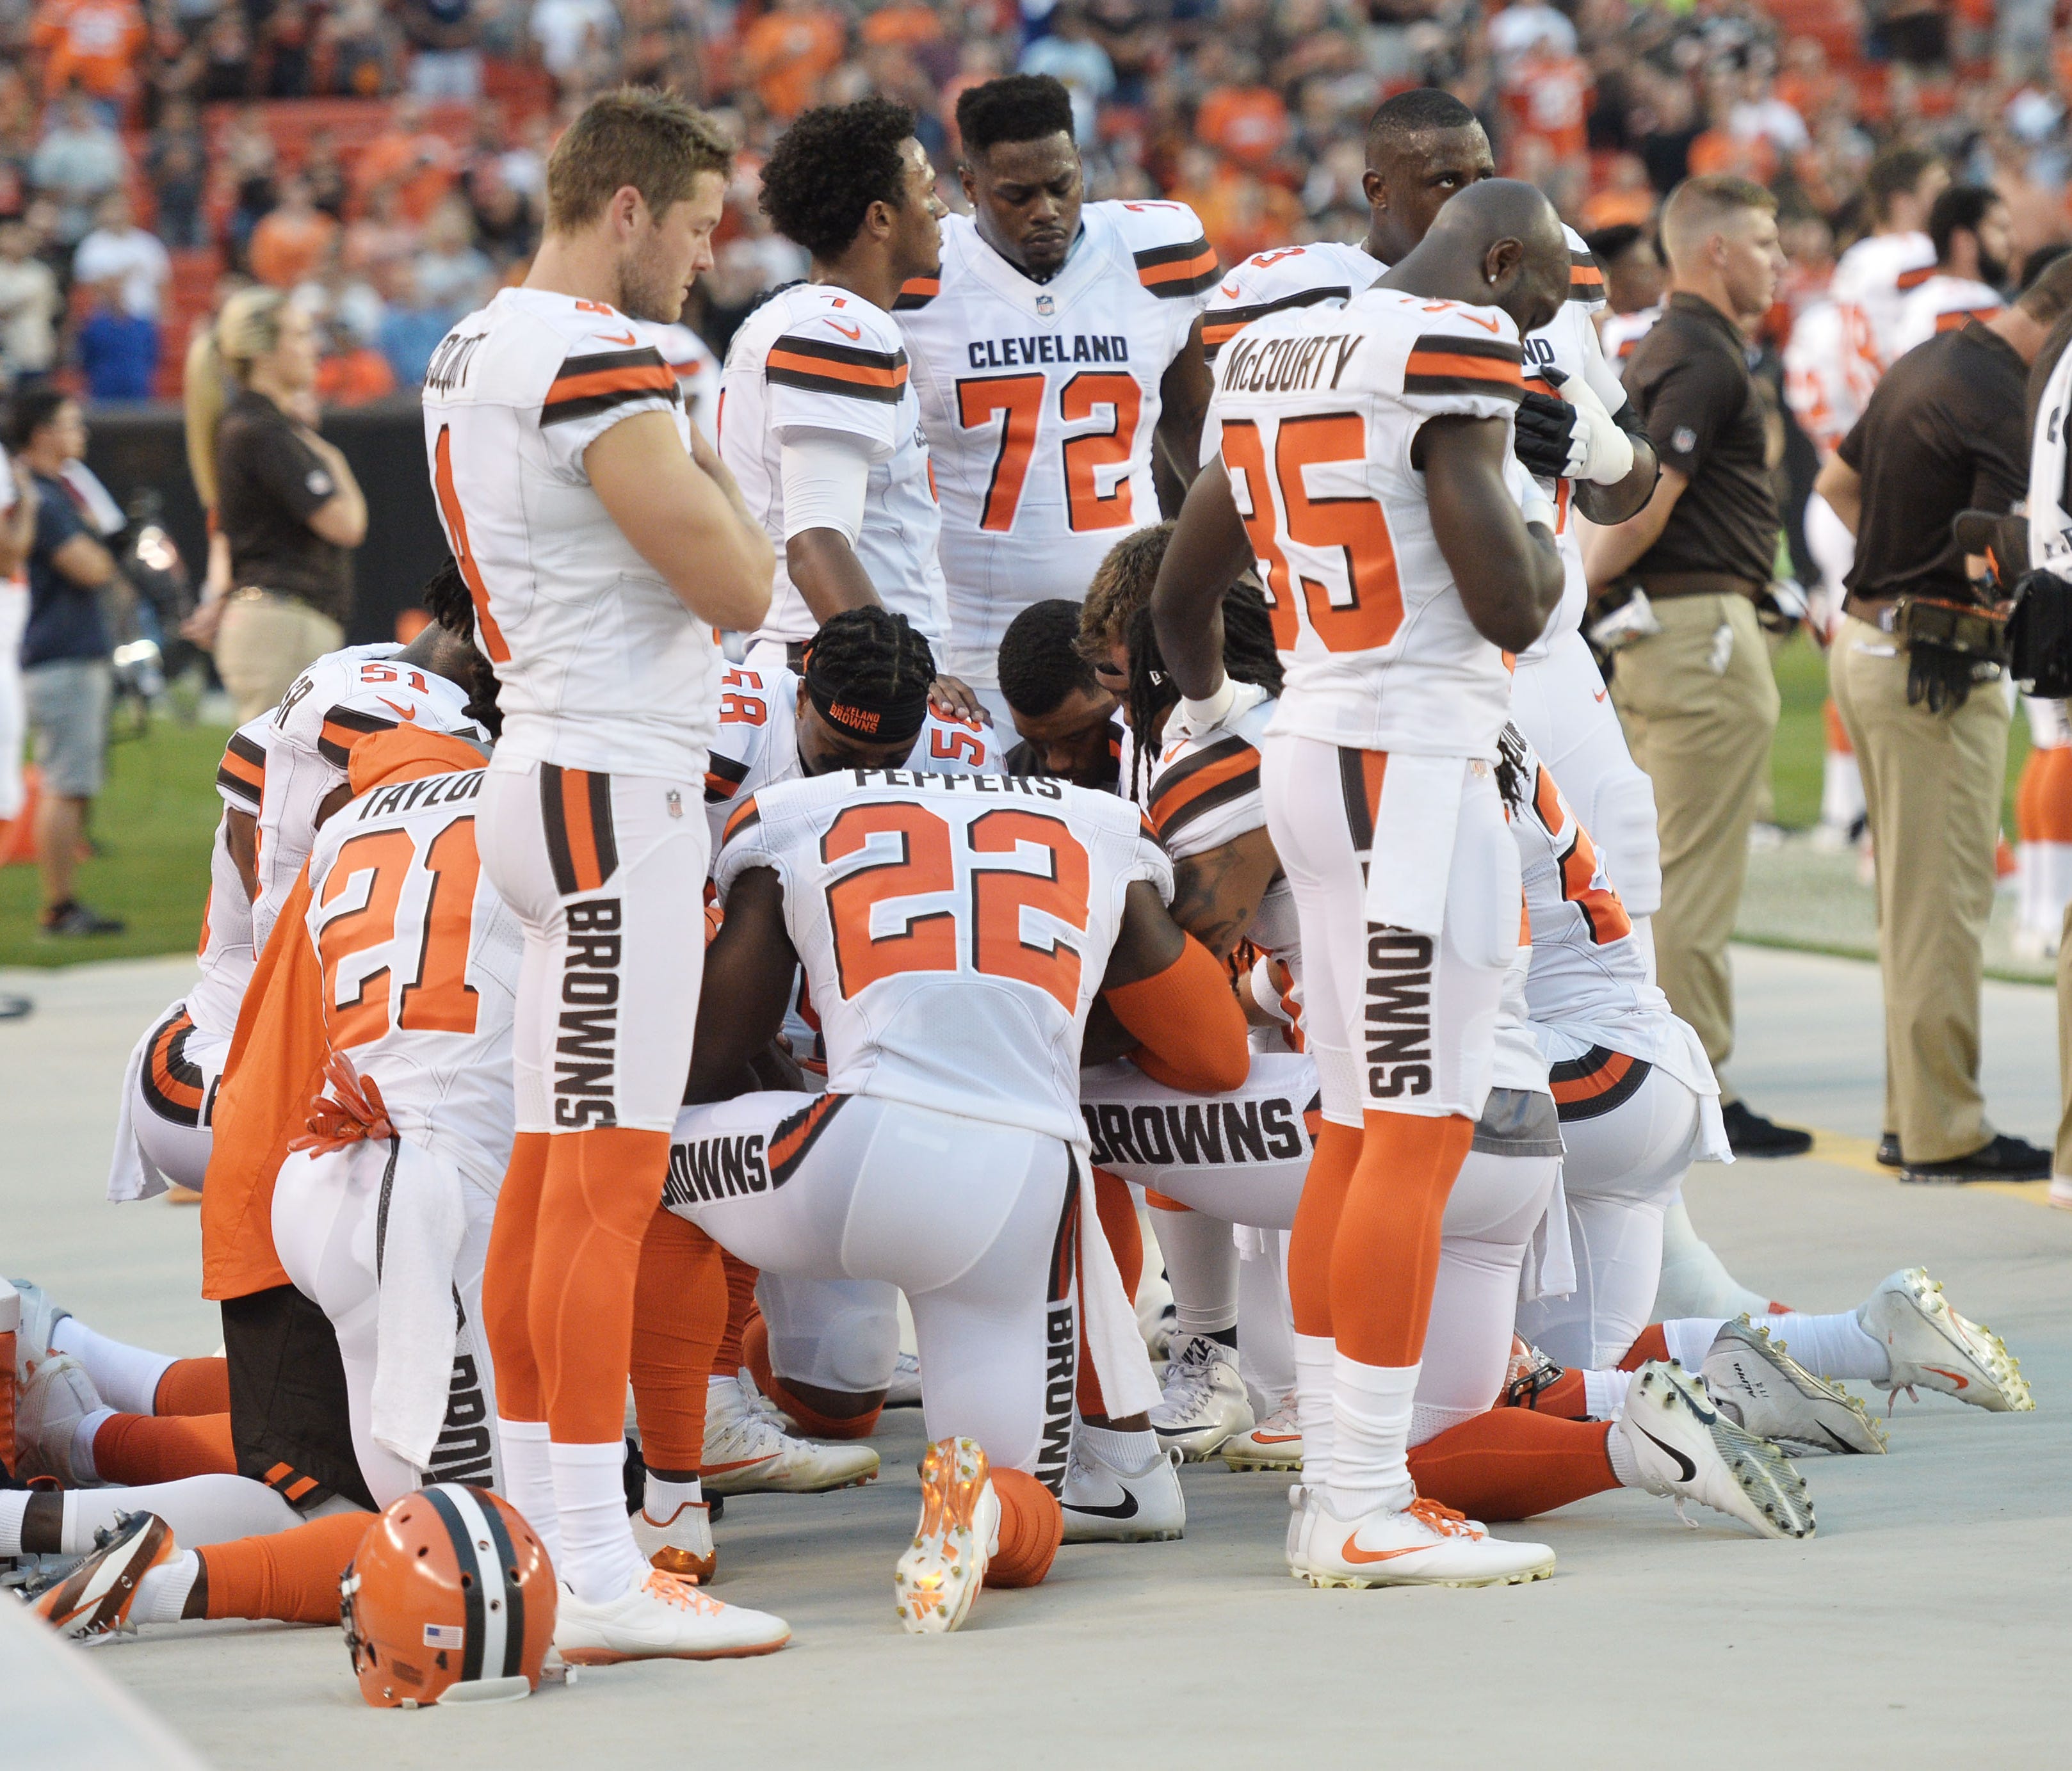 Members of the Cleveland Browns kneel during the national anthem before a game against the New York Giants at FirstEnergy Stadium.